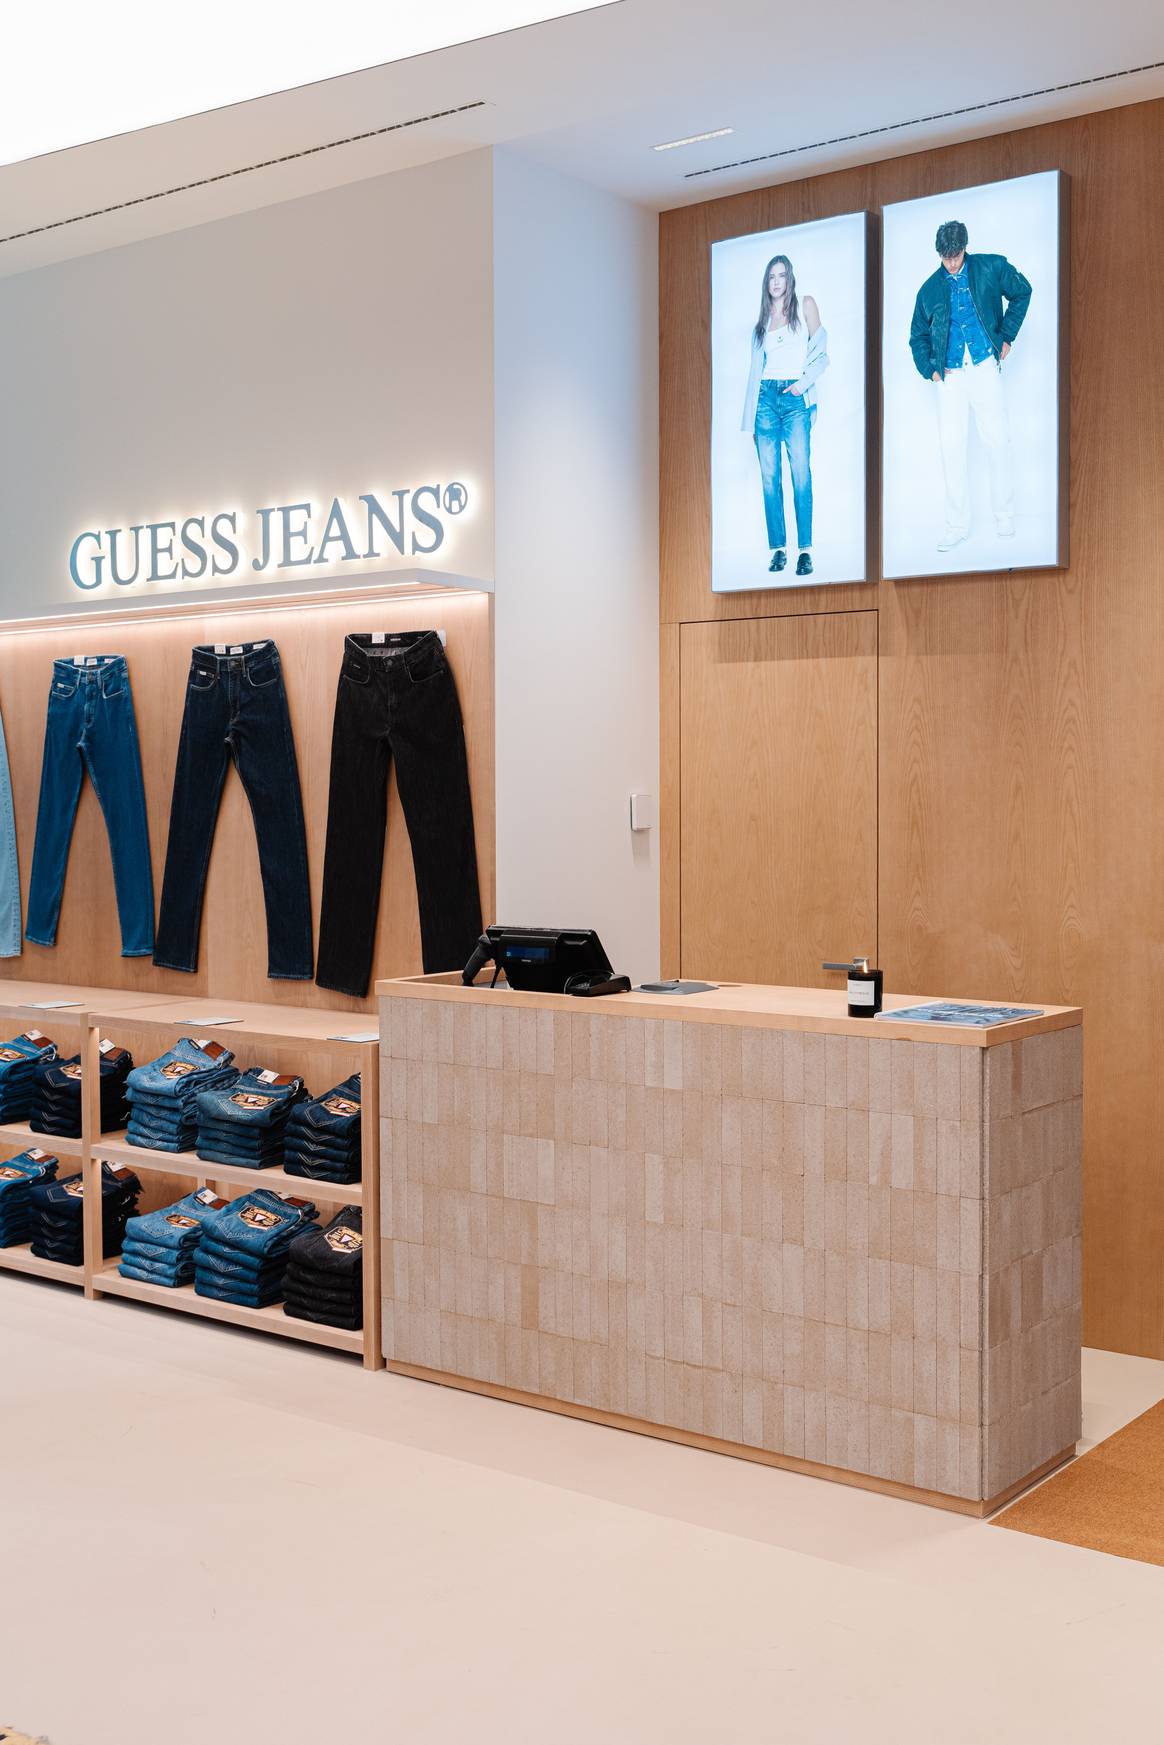 The world's first Guess Jeans store.